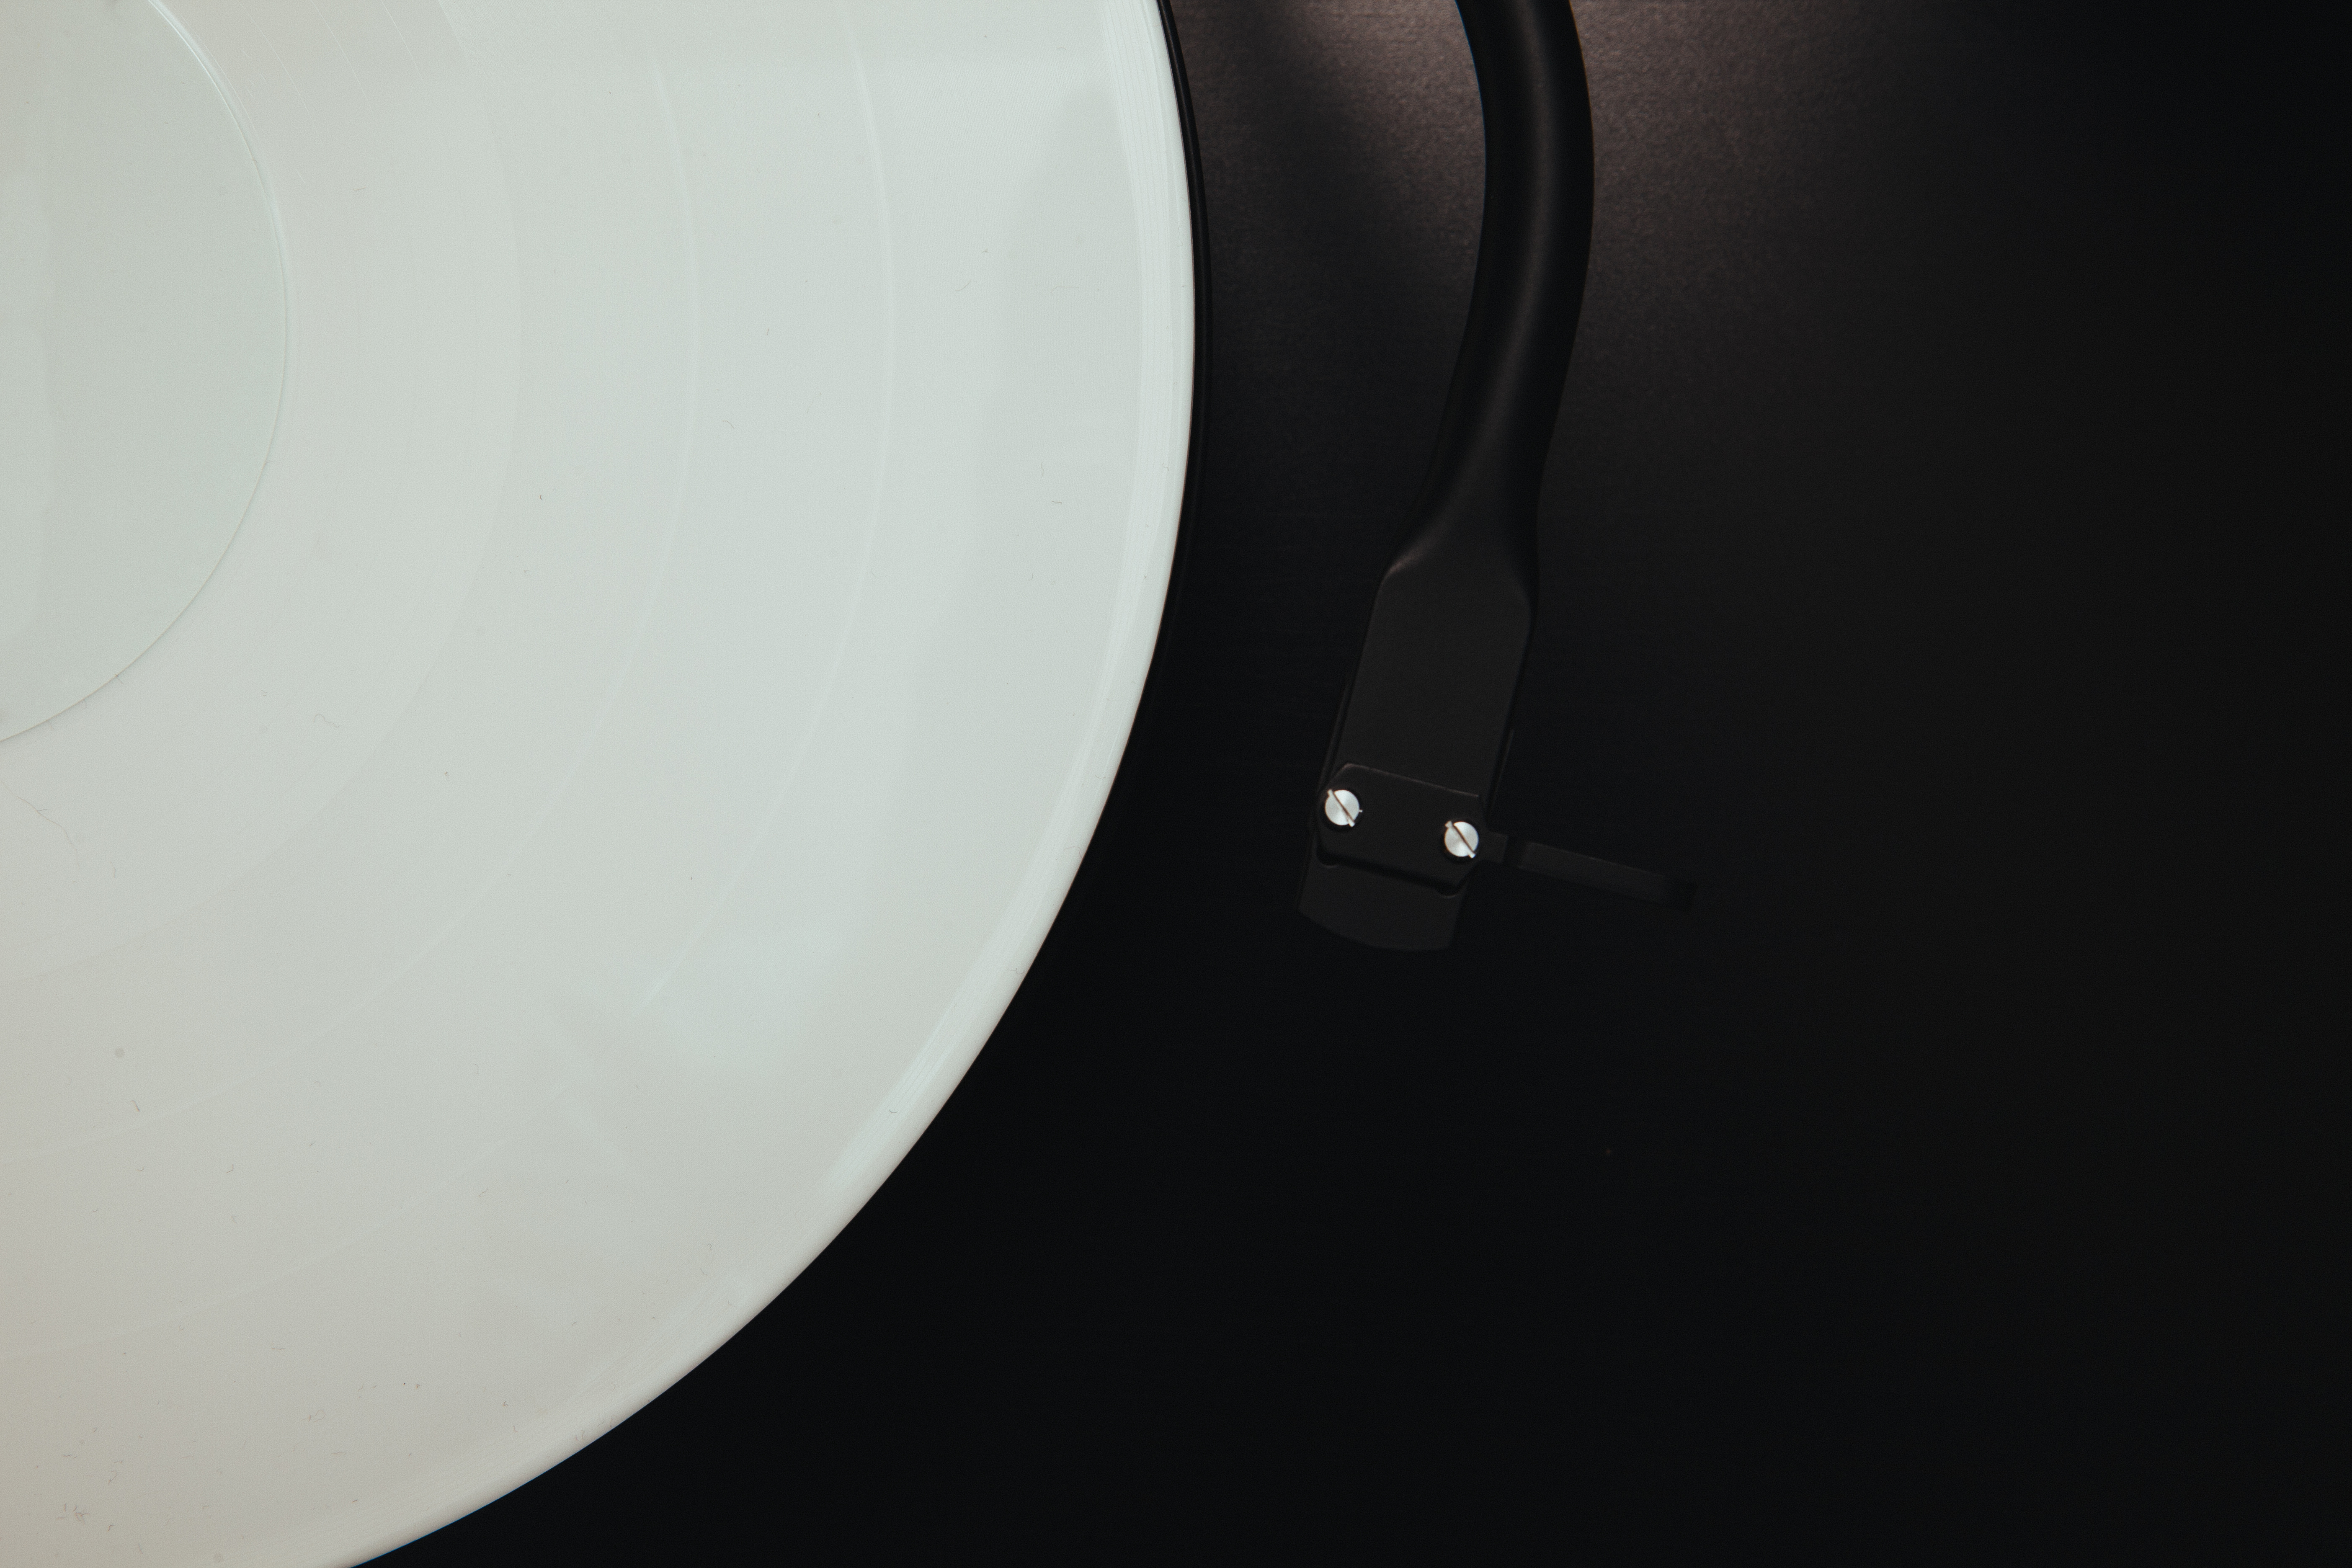 117204 download wallpaper vinyl, minimalism, bw, chb, turntable, record player screensavers and pictures for free